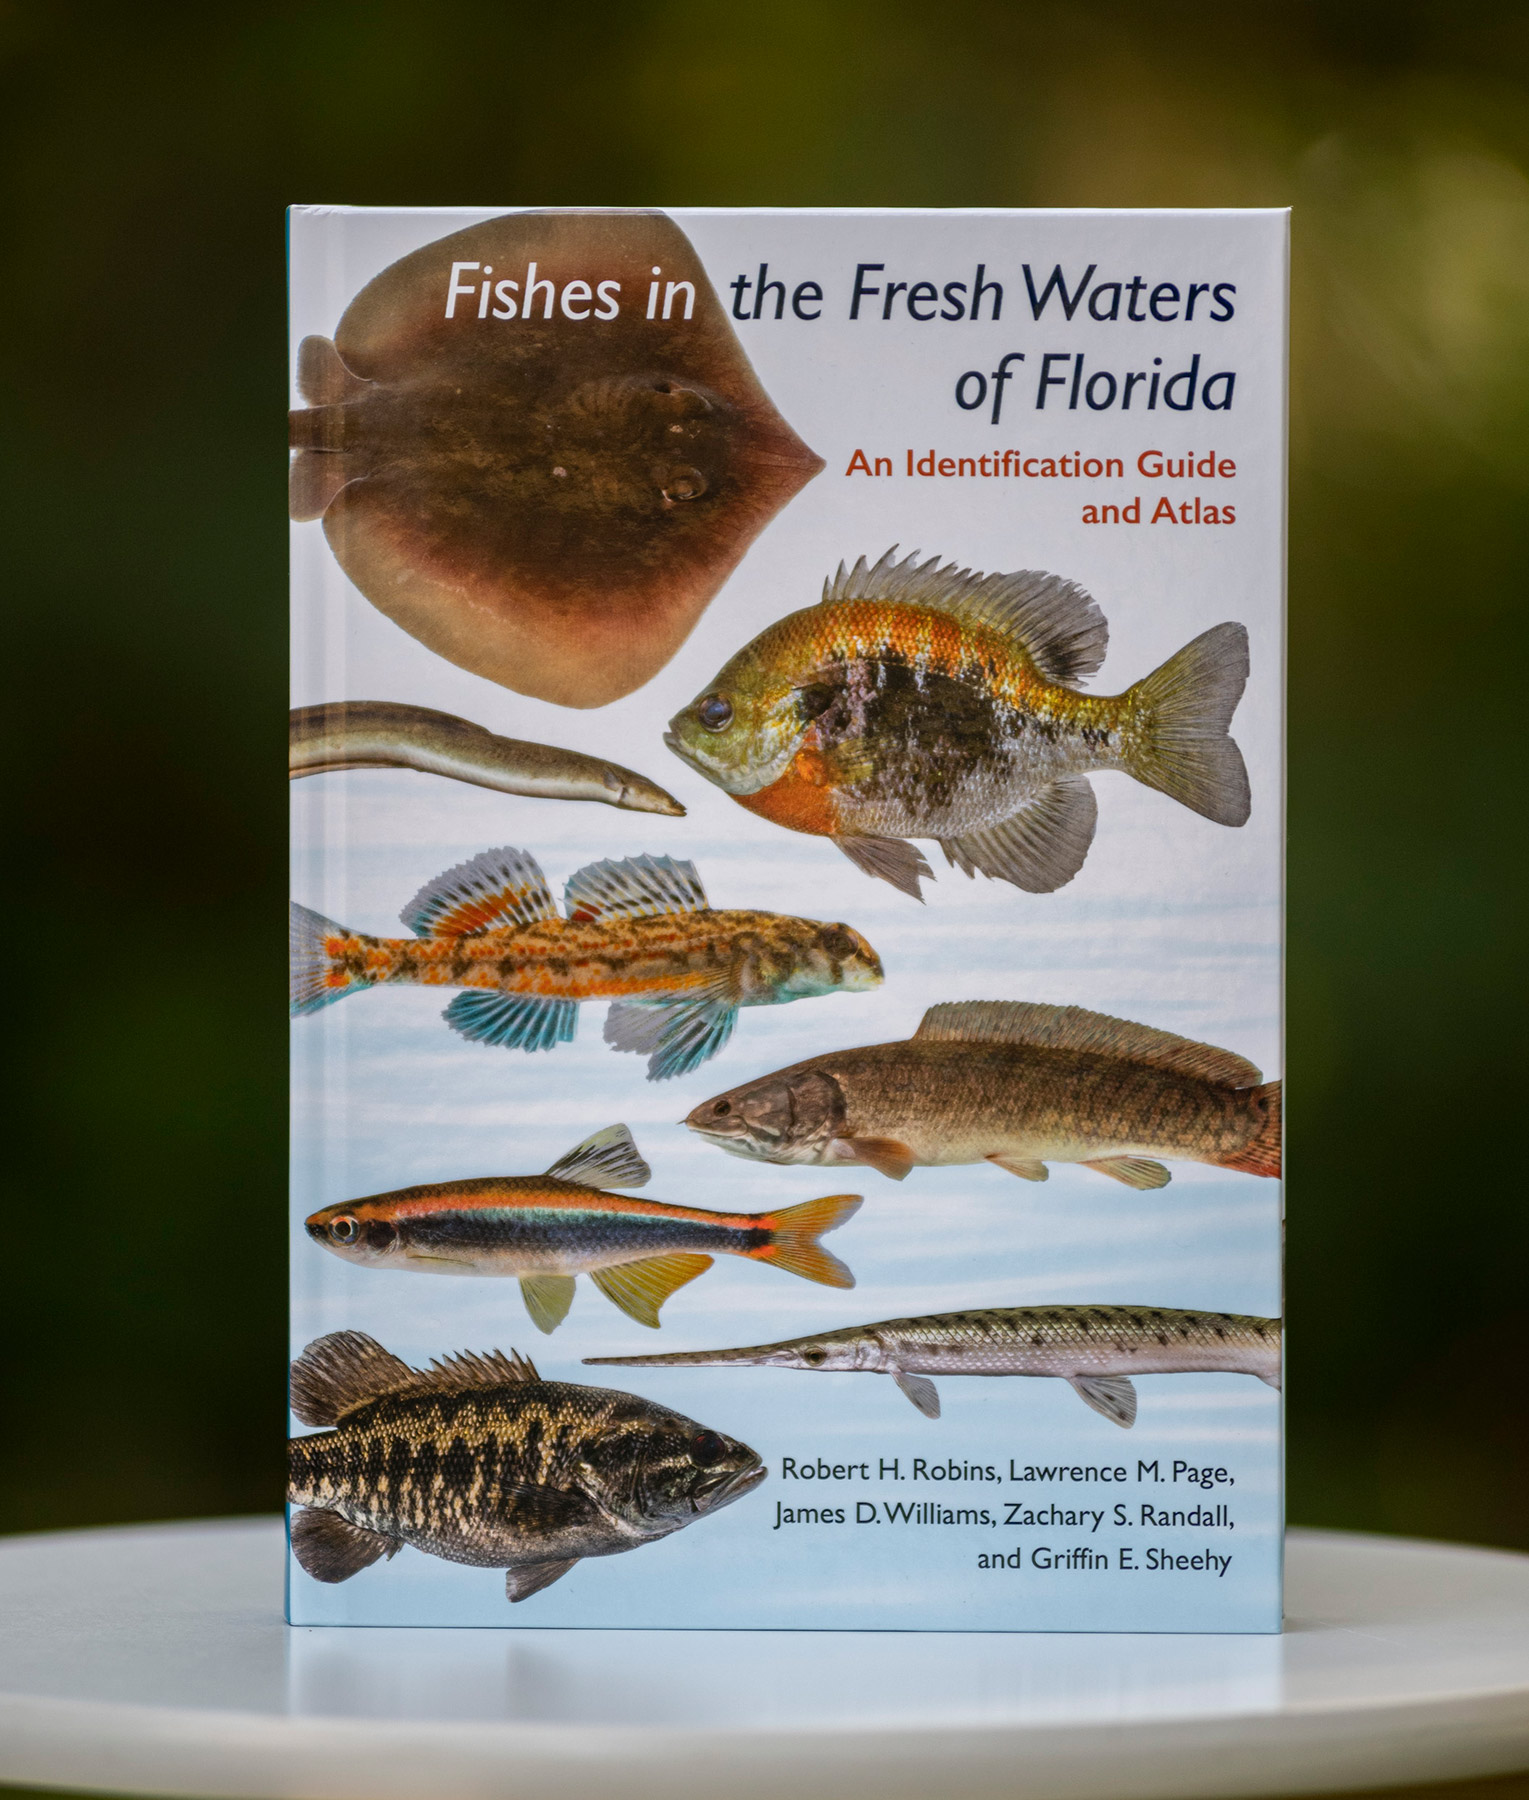 Fishes in the Fresh Waters of Florida Gallery – Discover Fishes